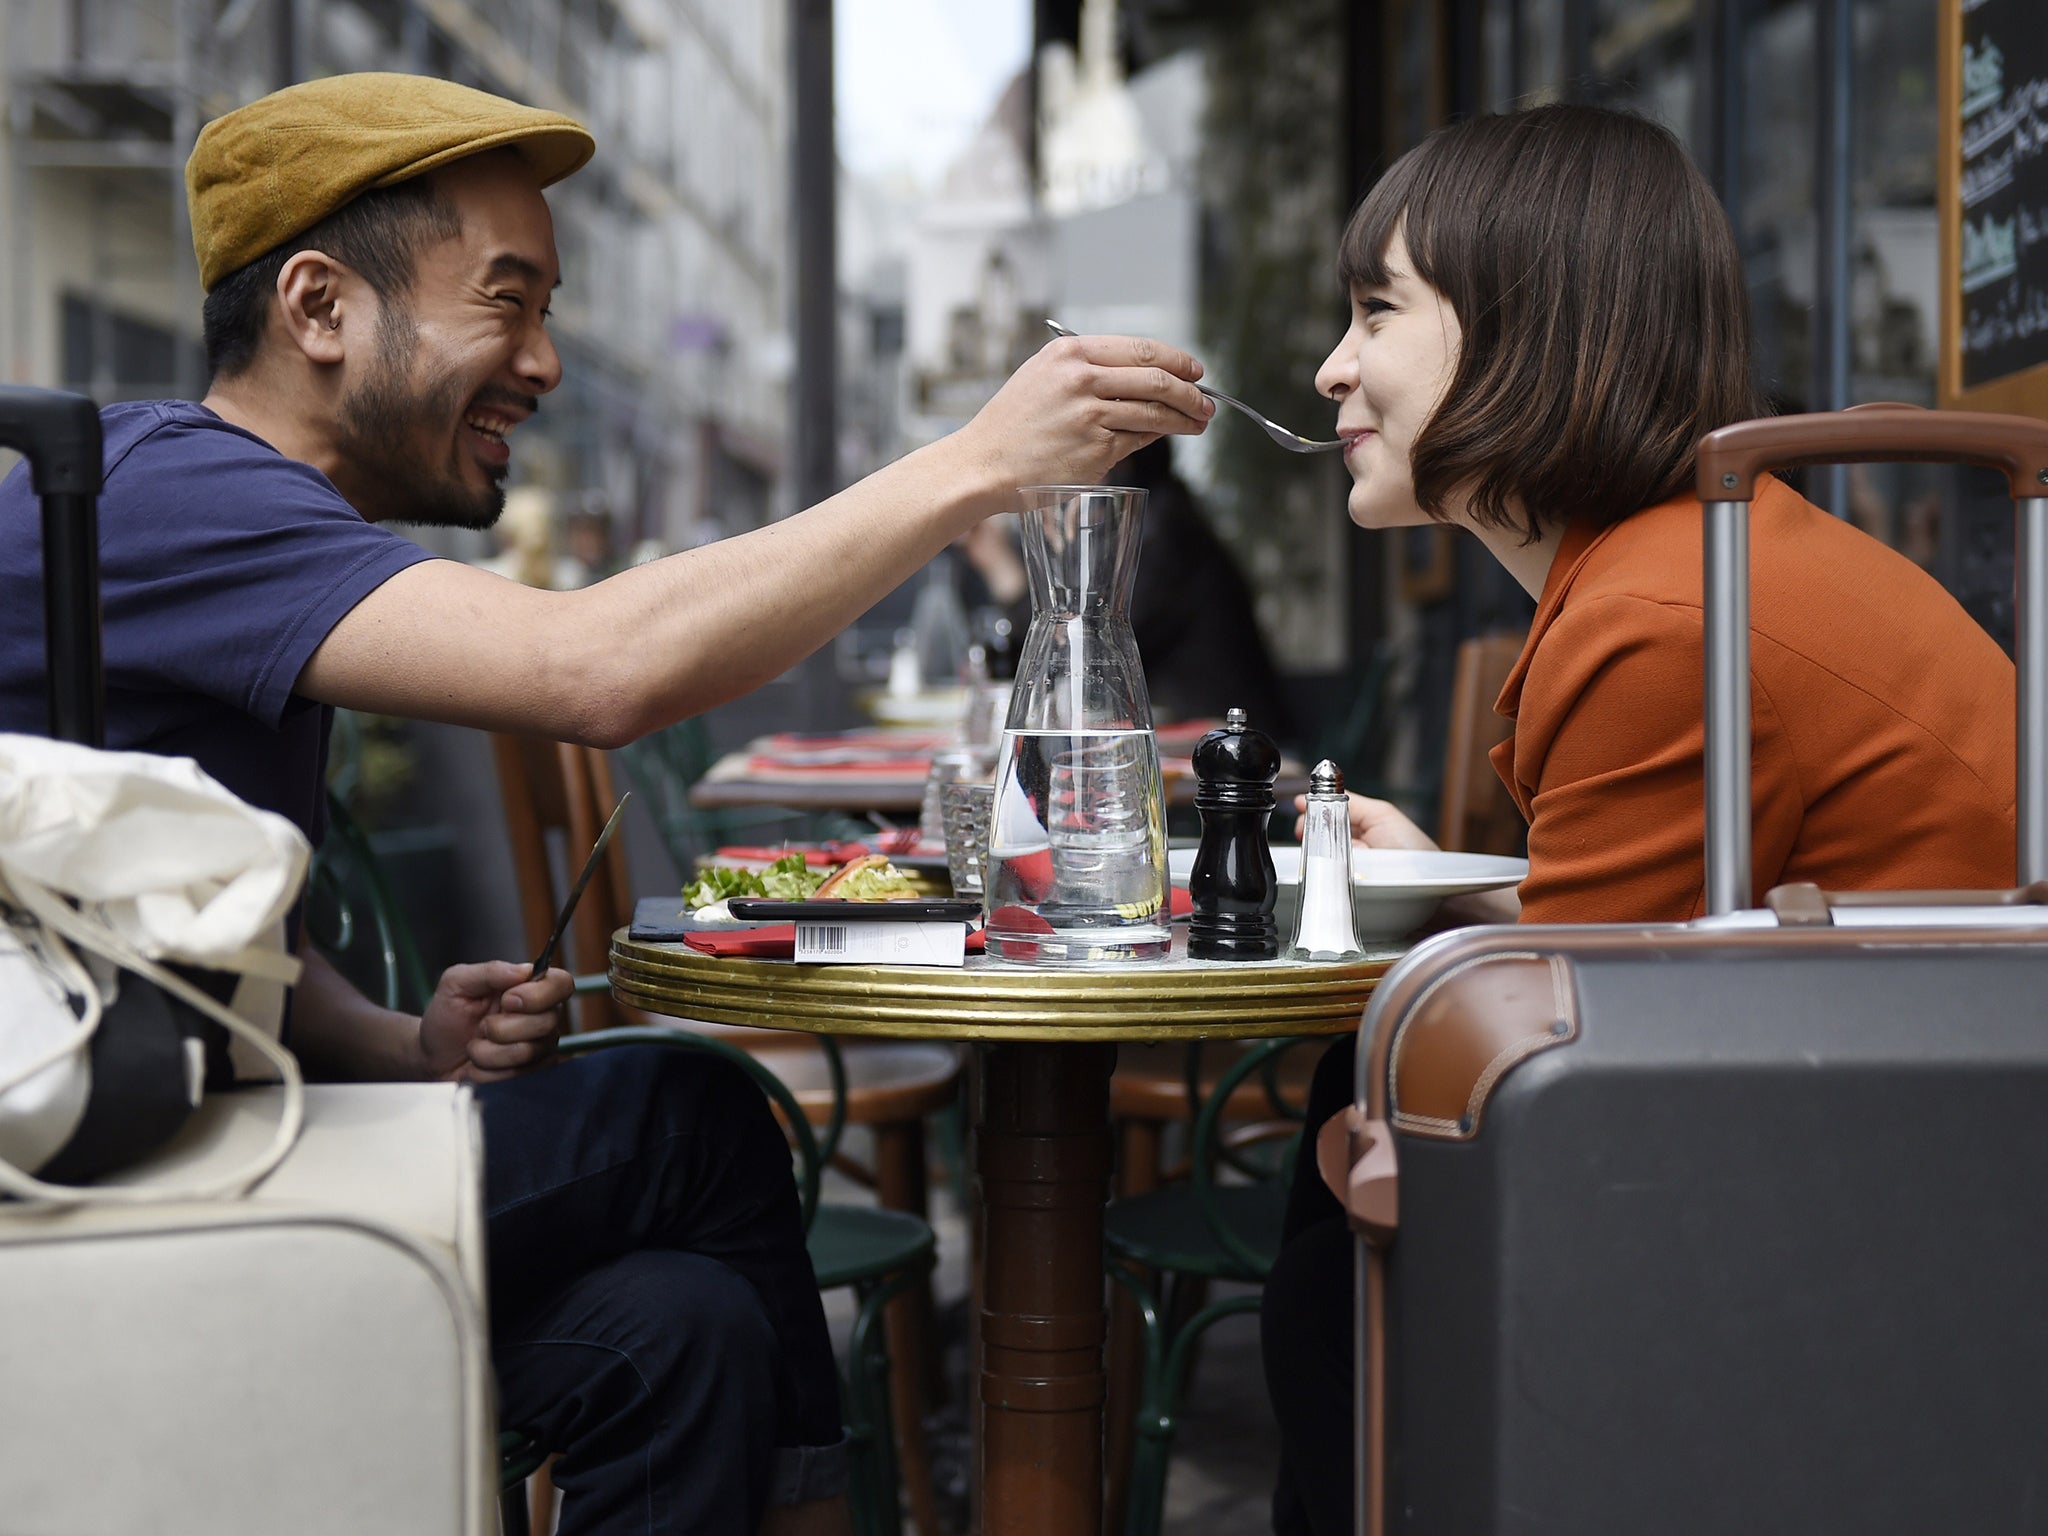 A man feeds his partner as they eat lunch at the terrace of a restaurant in Paris